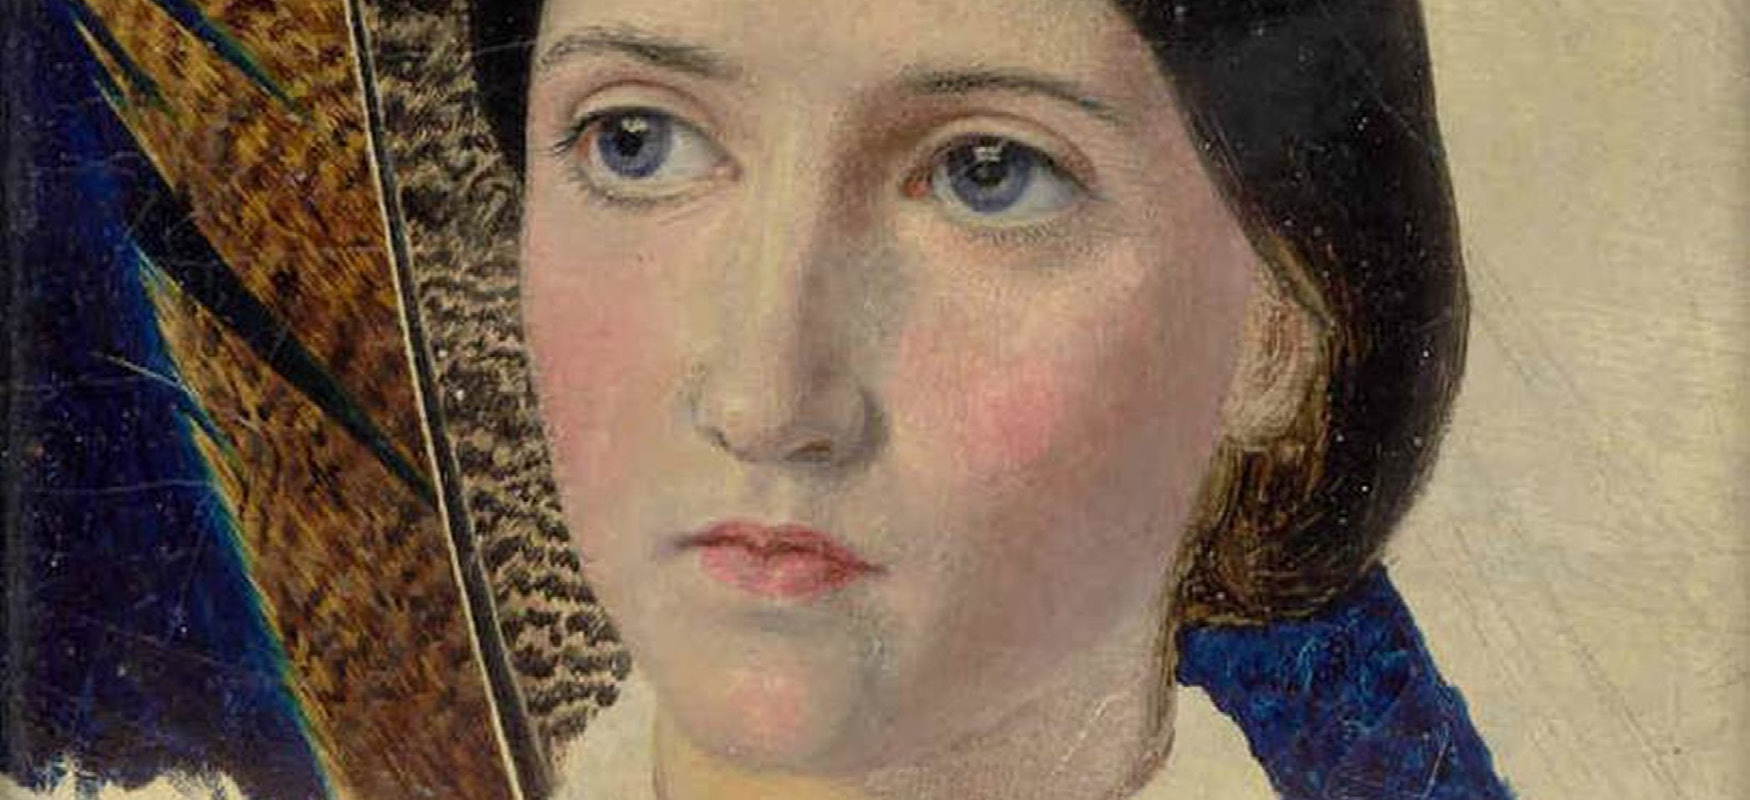 christina rossetti, watts gallery compton, surrey, art gallery, whats on, where to go, events surrey, january 2019